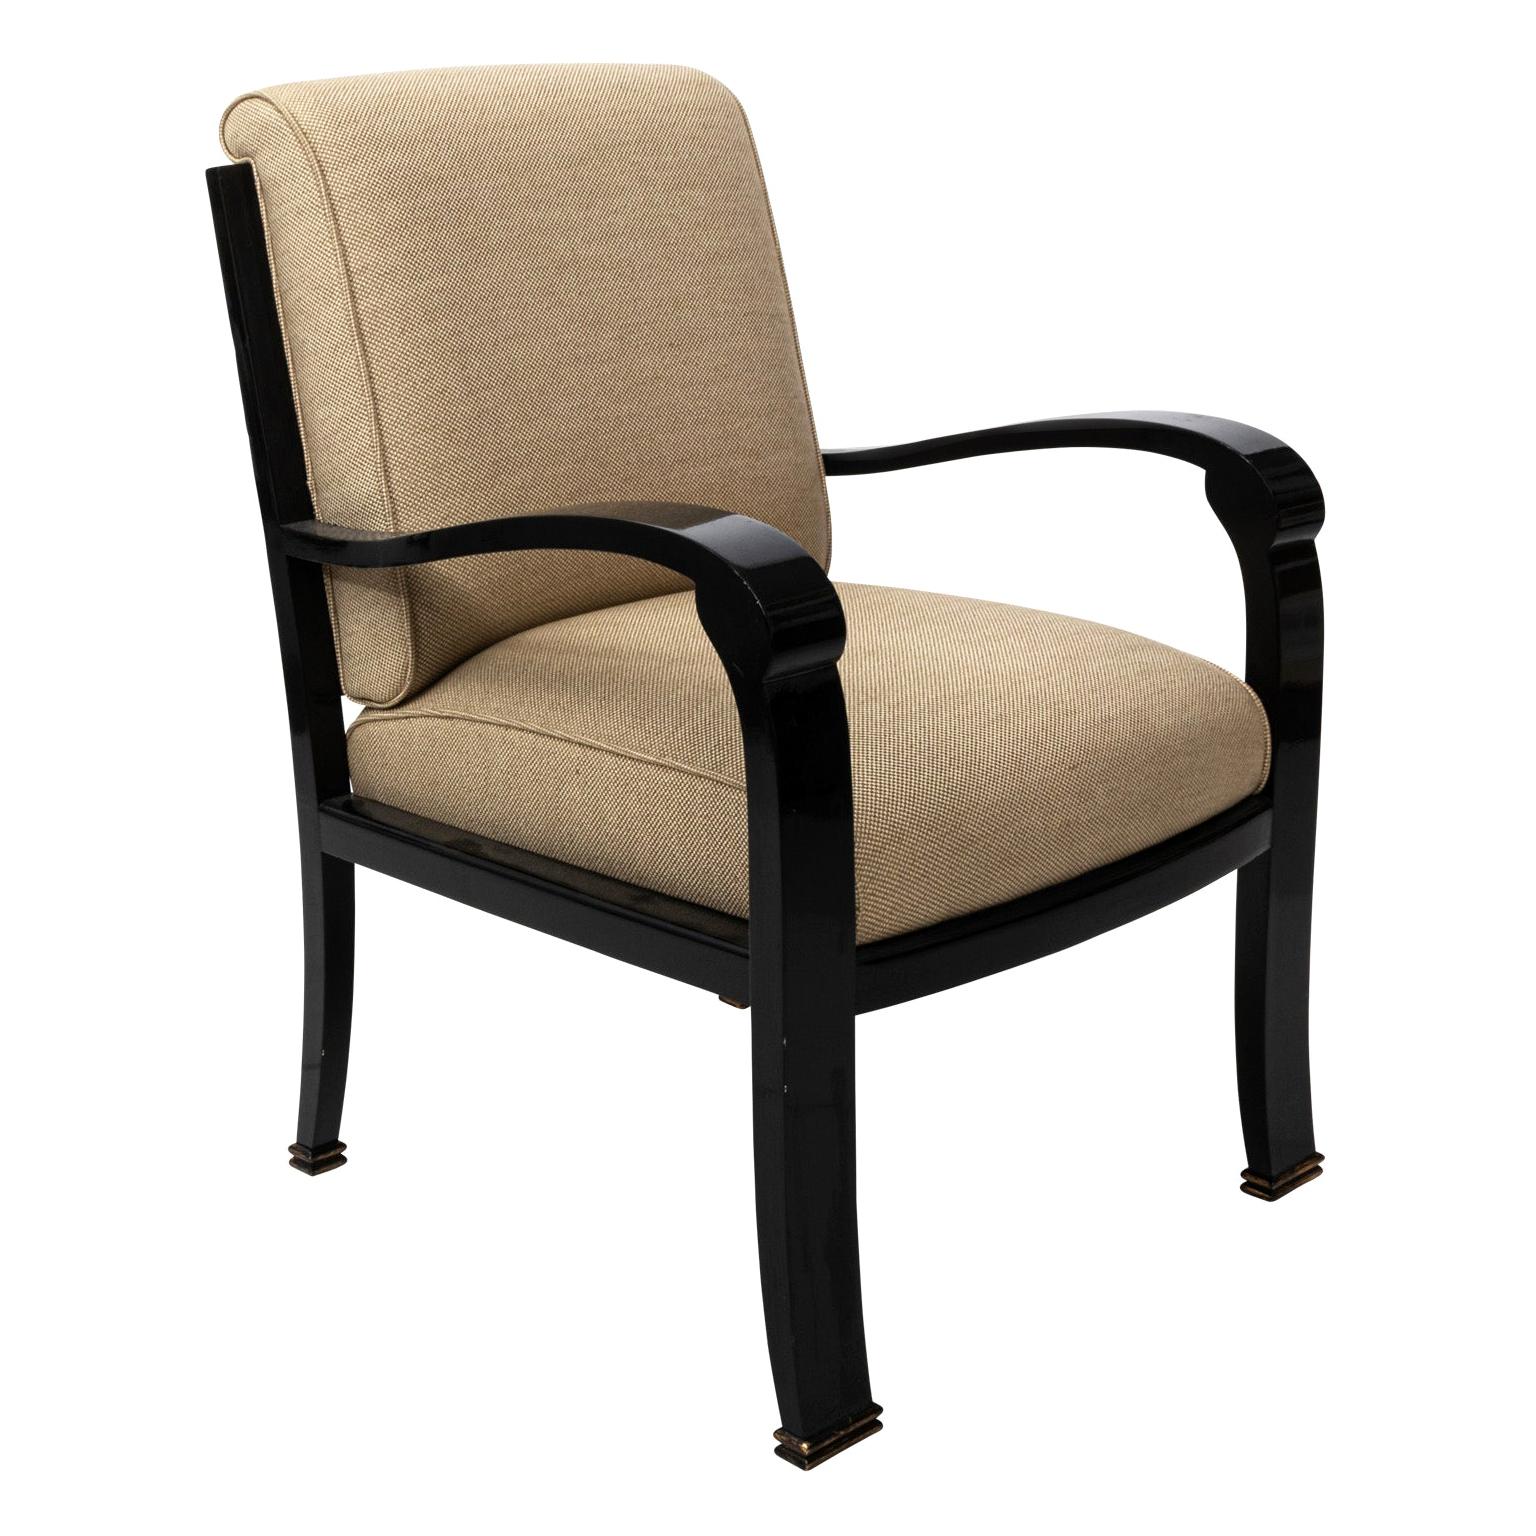 Black Lacquered Upholstered Desk Chair